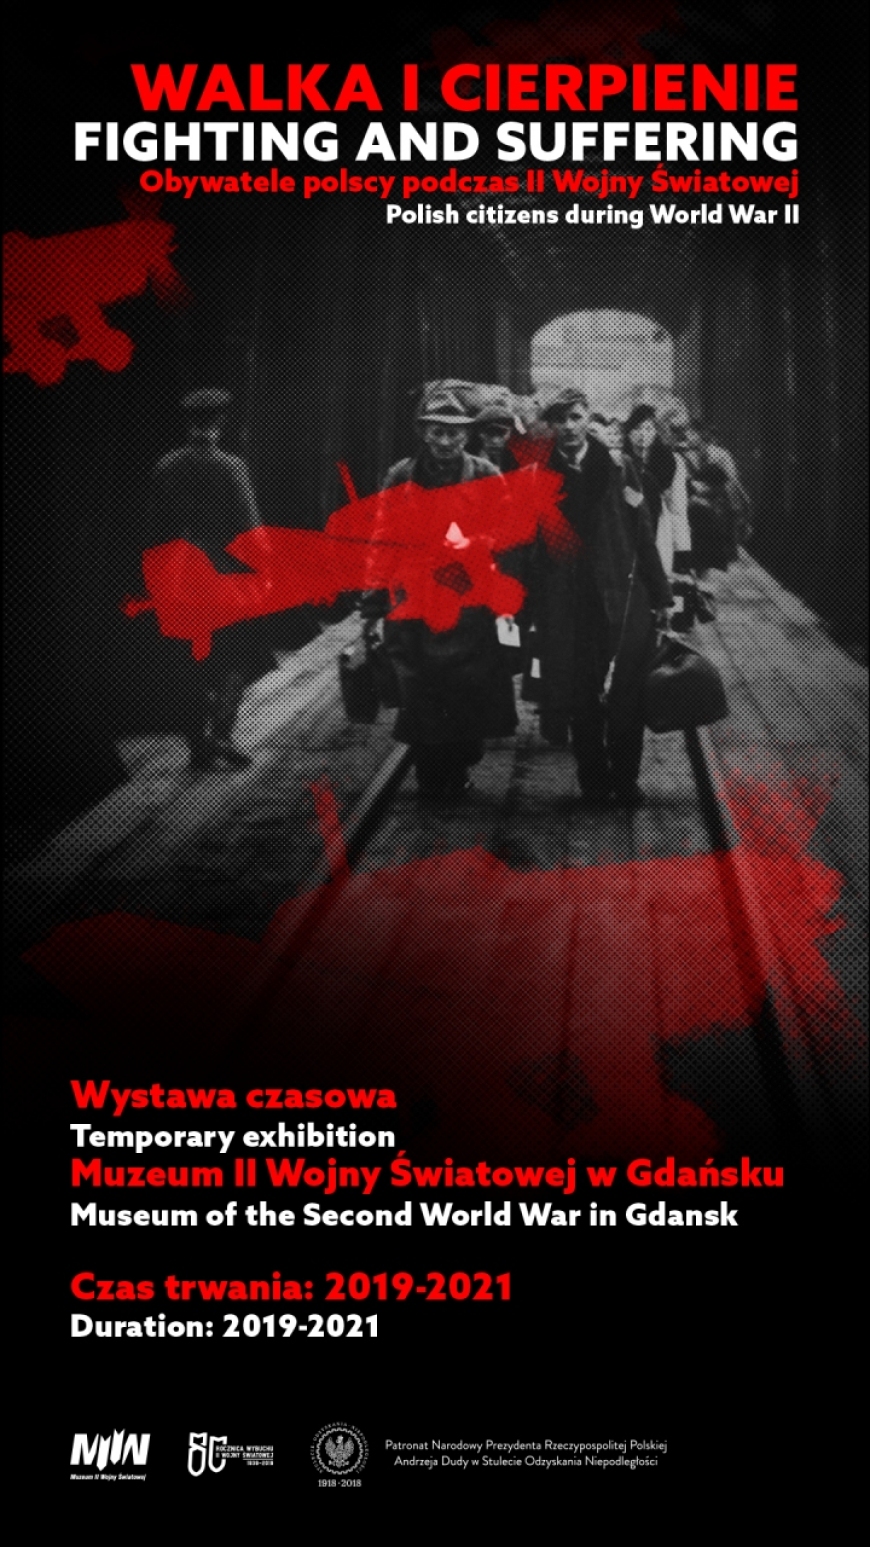 Temporary exhibition “Fighting and Suffering. Polish citizens during World War II”